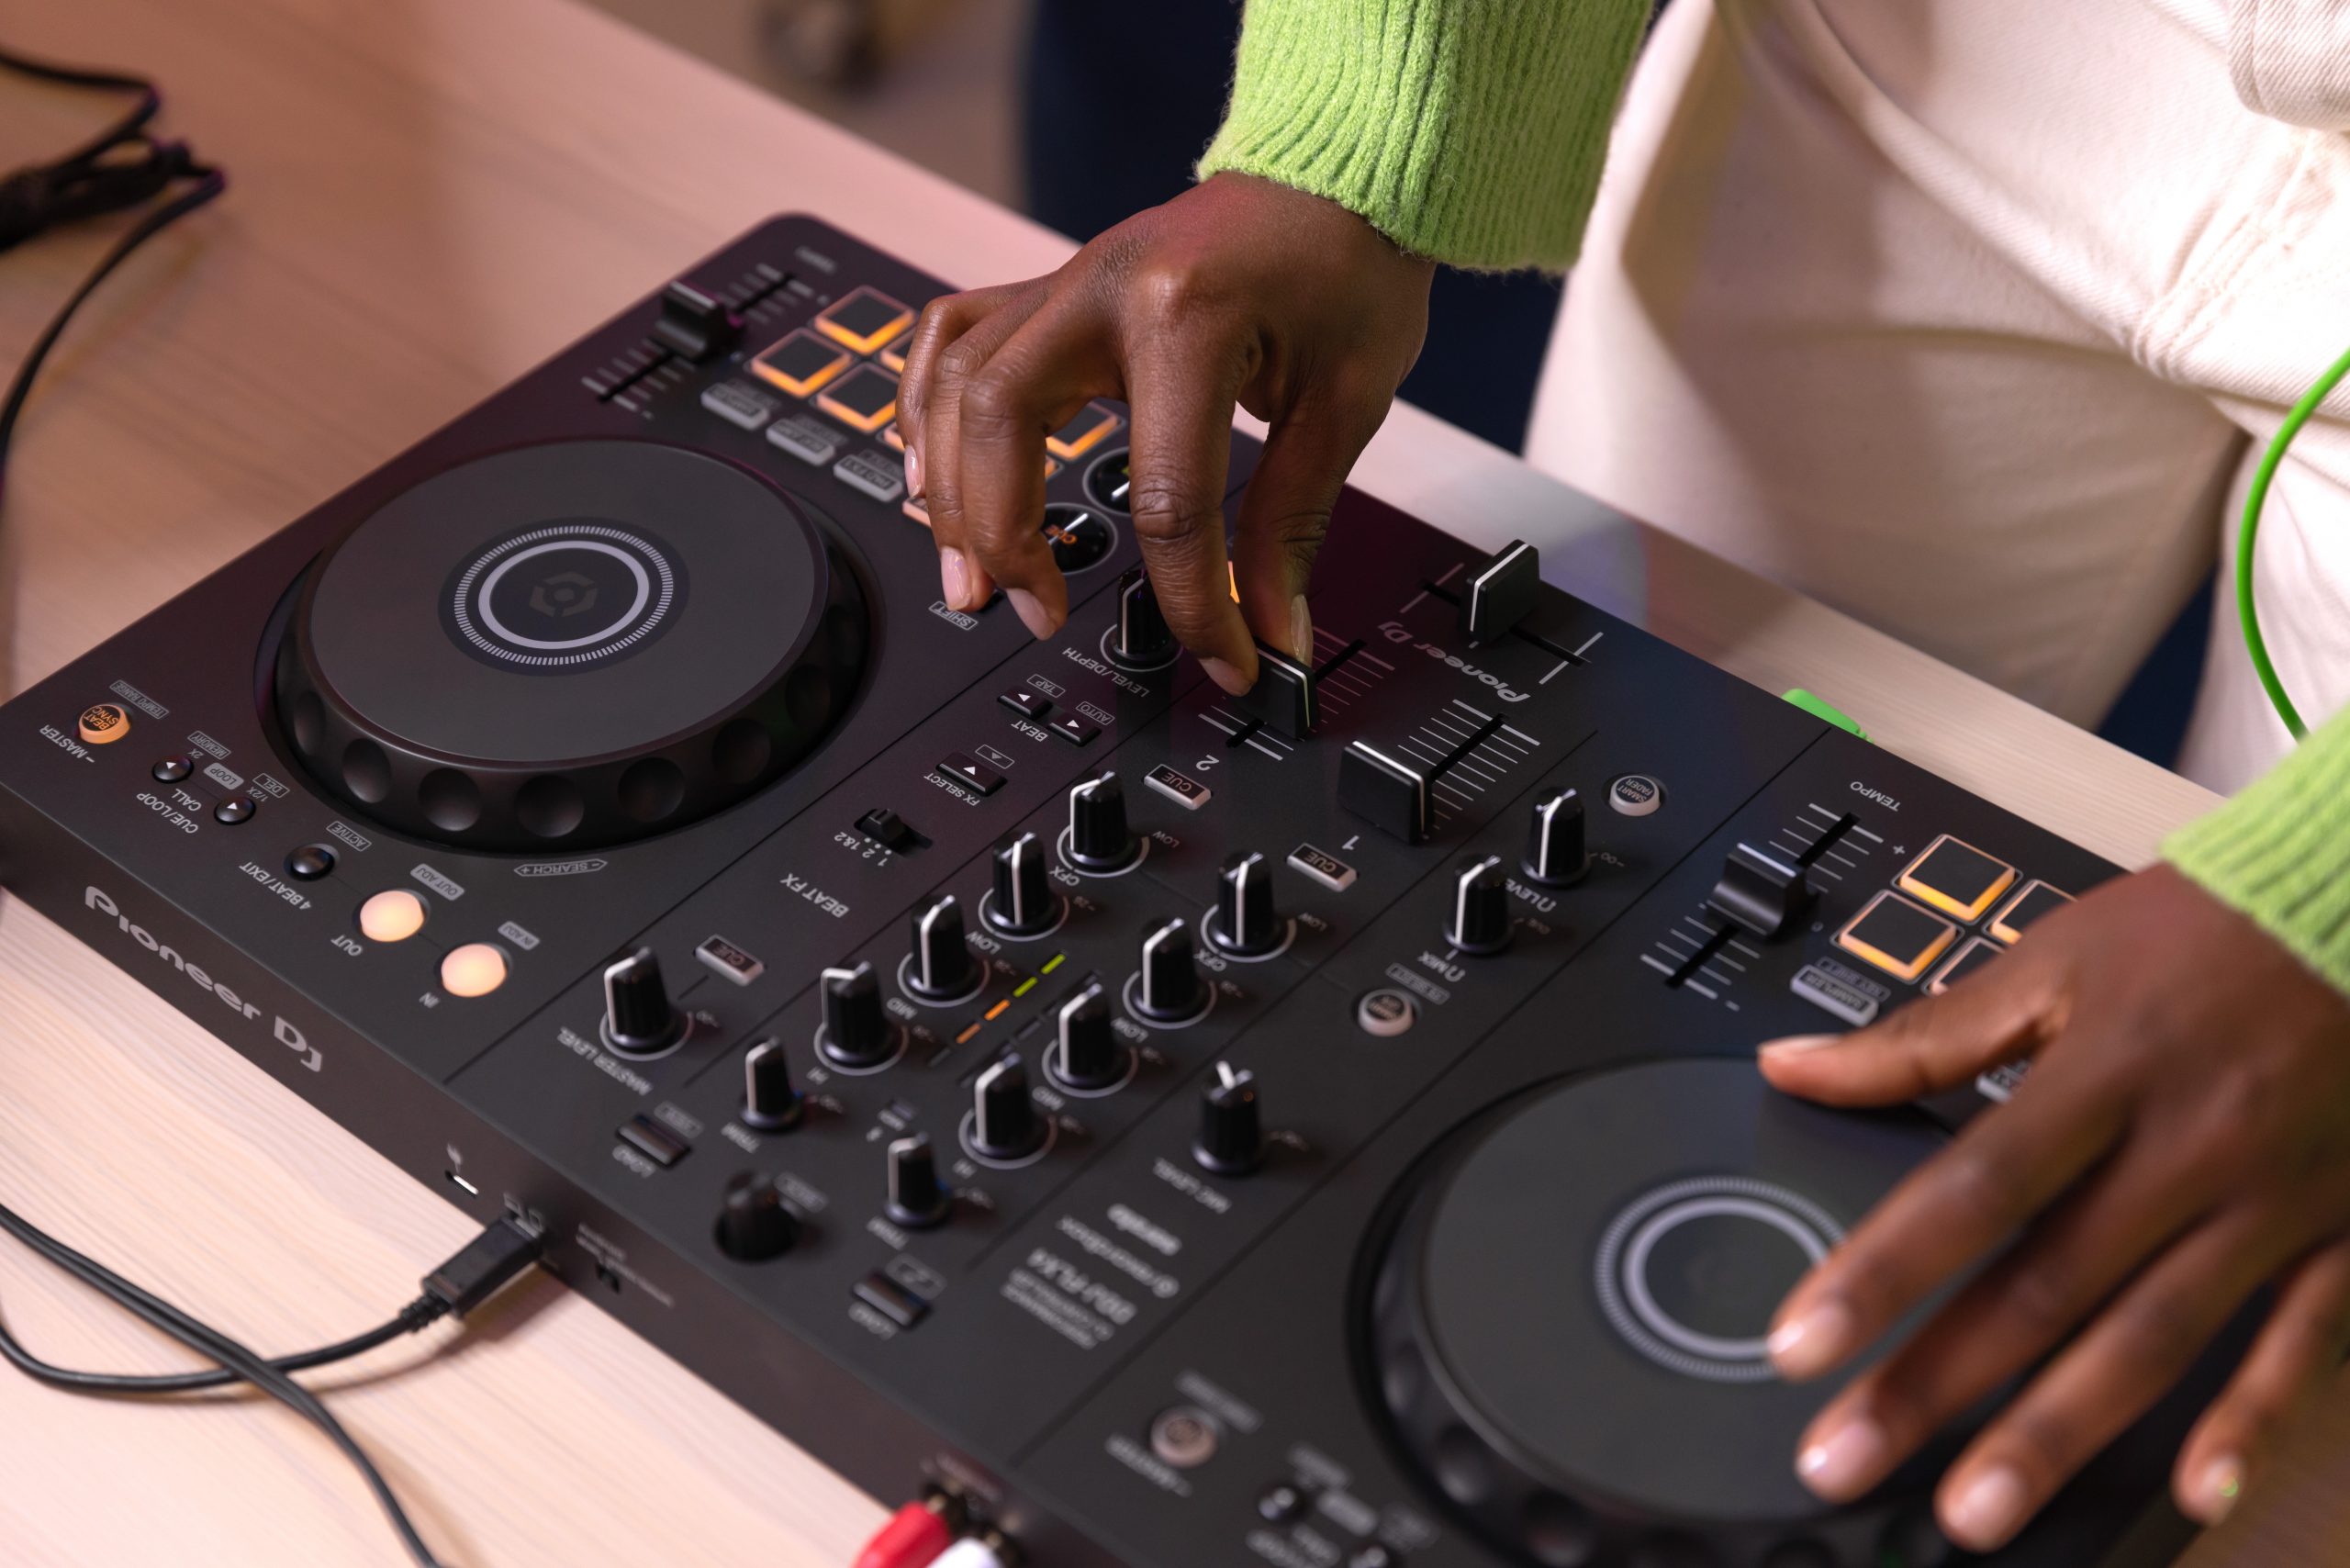 Connecting the Pioneer DJ DDJ-FLX4 to your mobile device